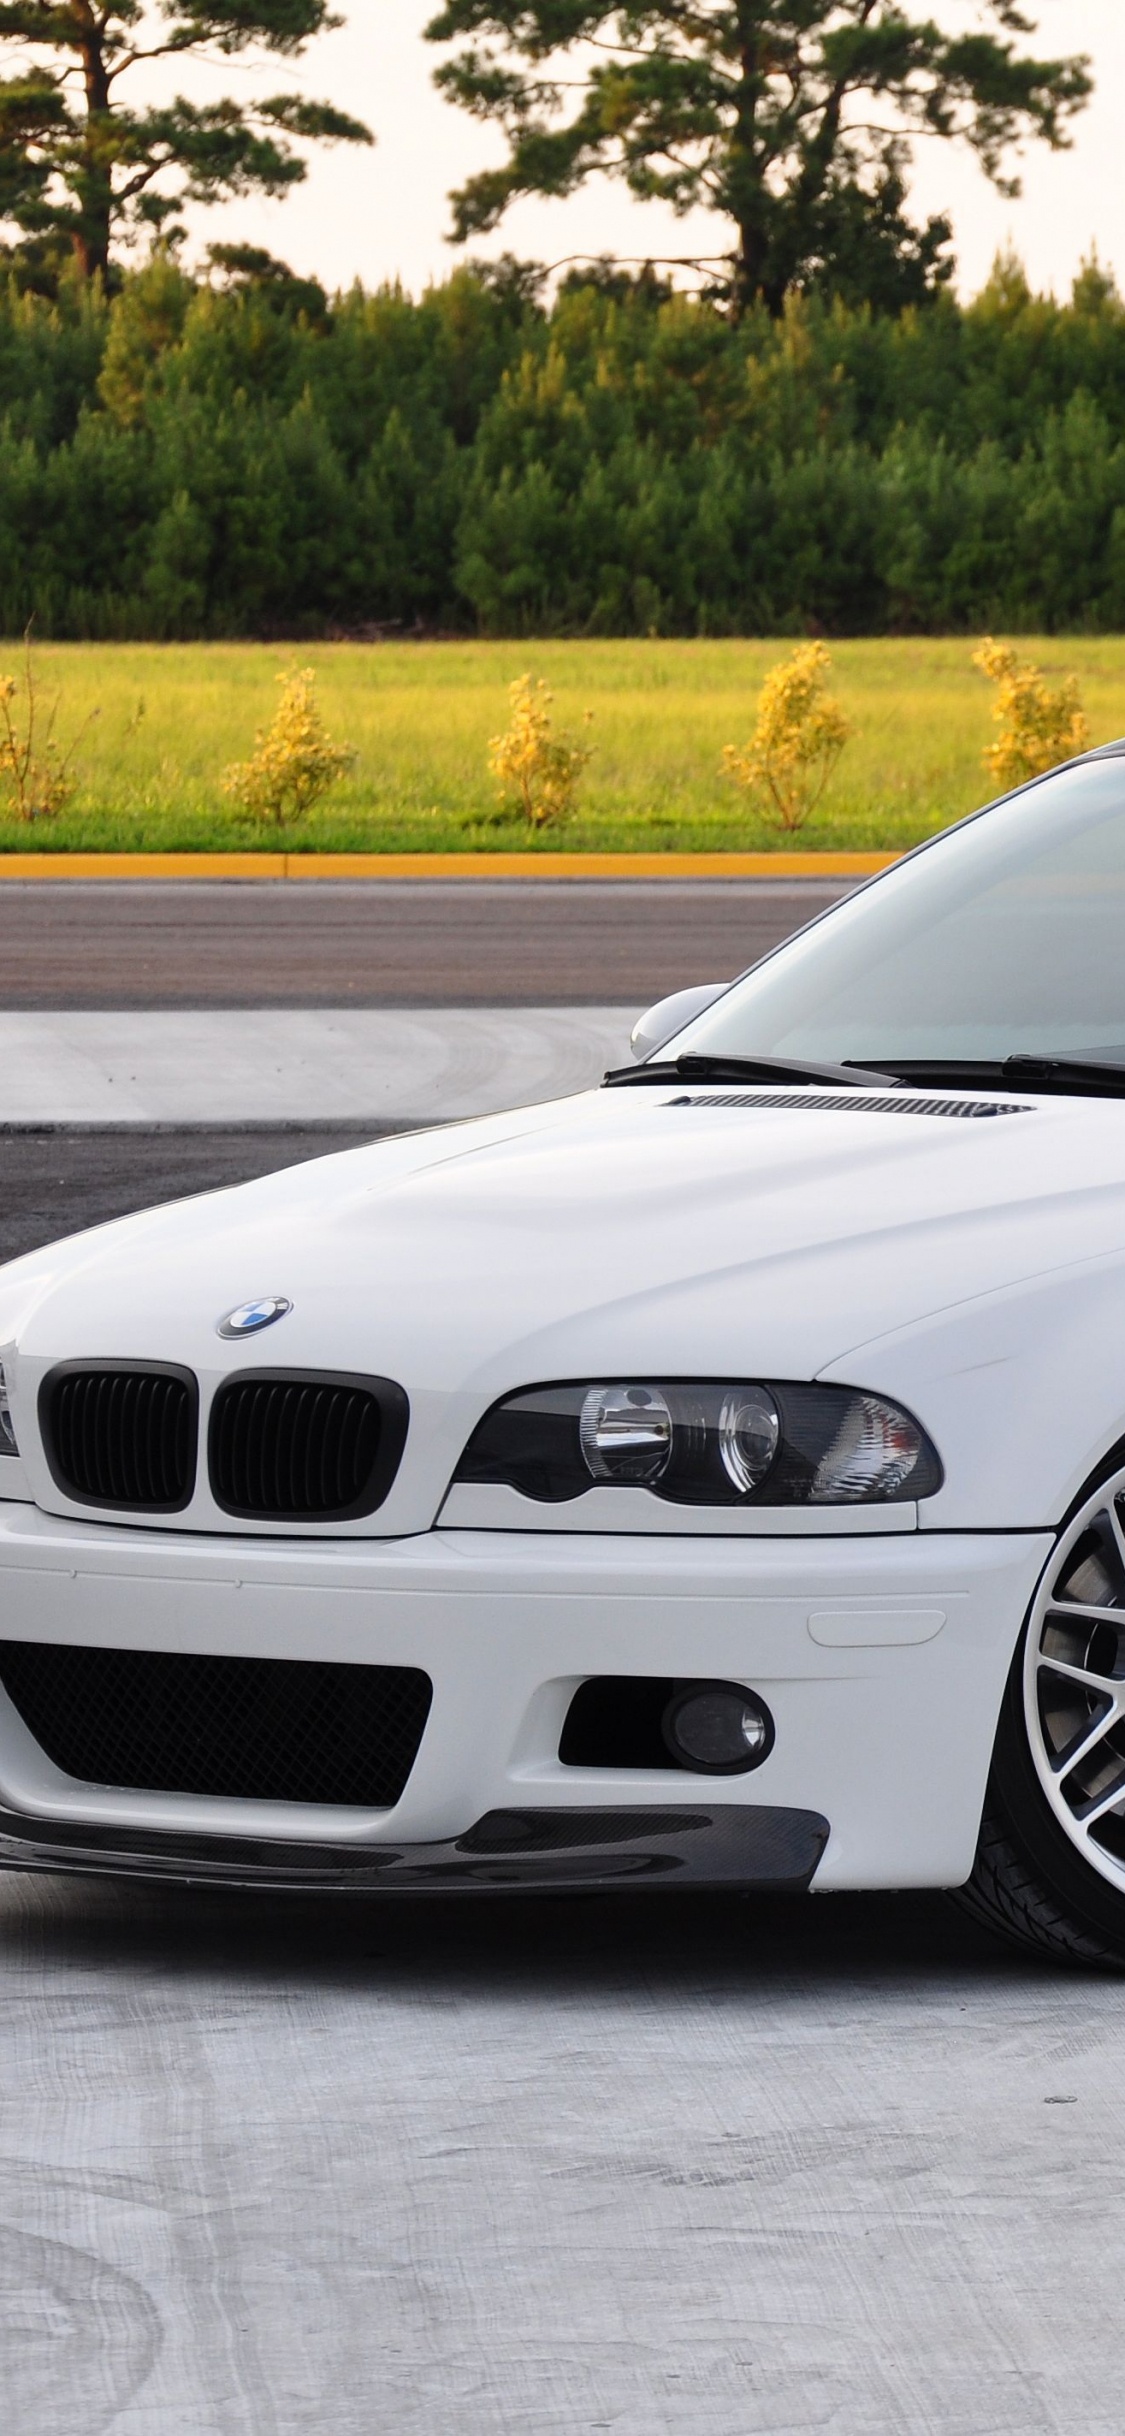 White Bmw m 3 Coupe on Road During Daytime. Wallpaper in 1125x2436 Resolution